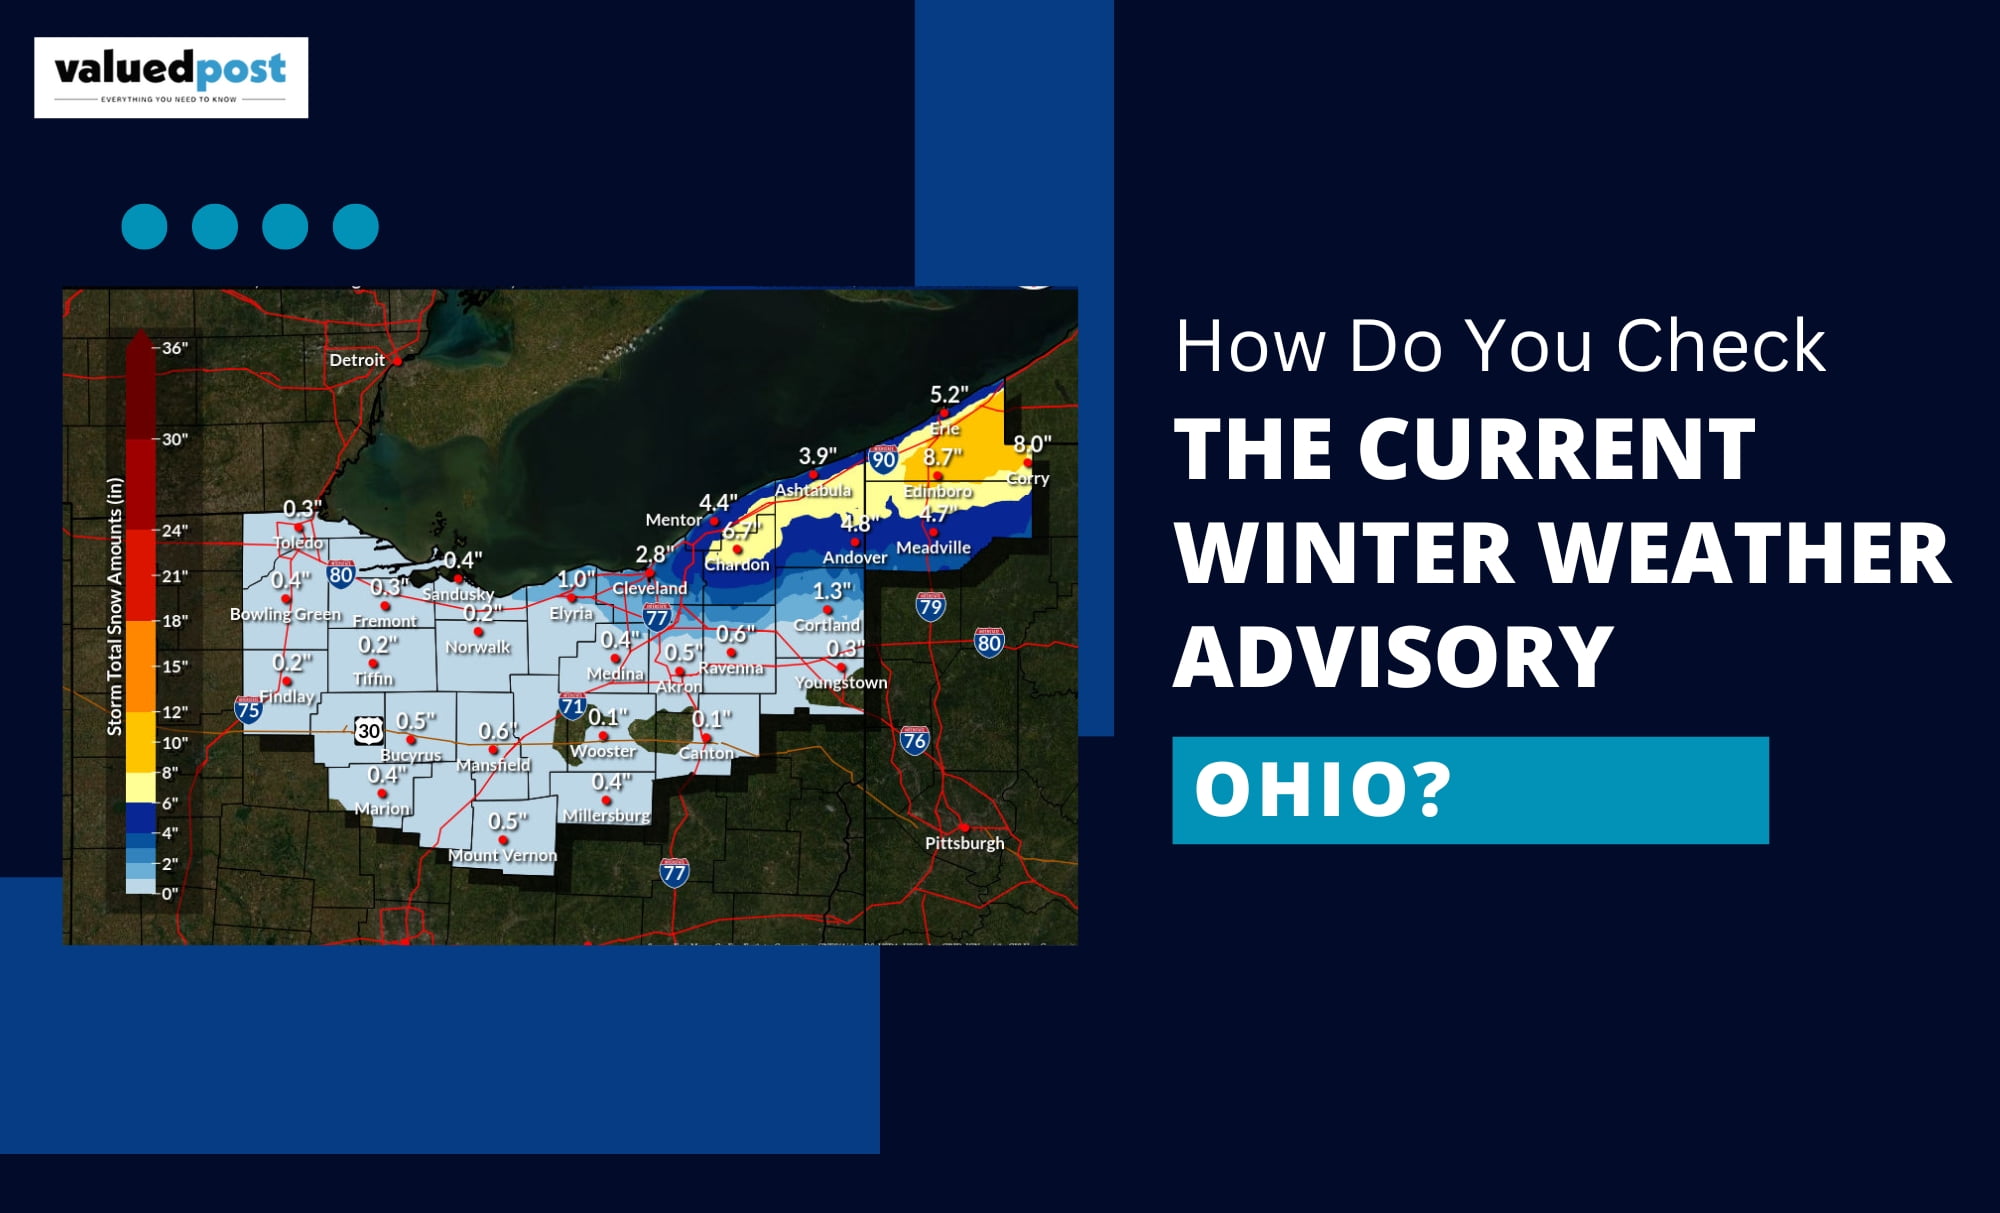 How Do You Check the Current Winter Weather Advisory Ohio?